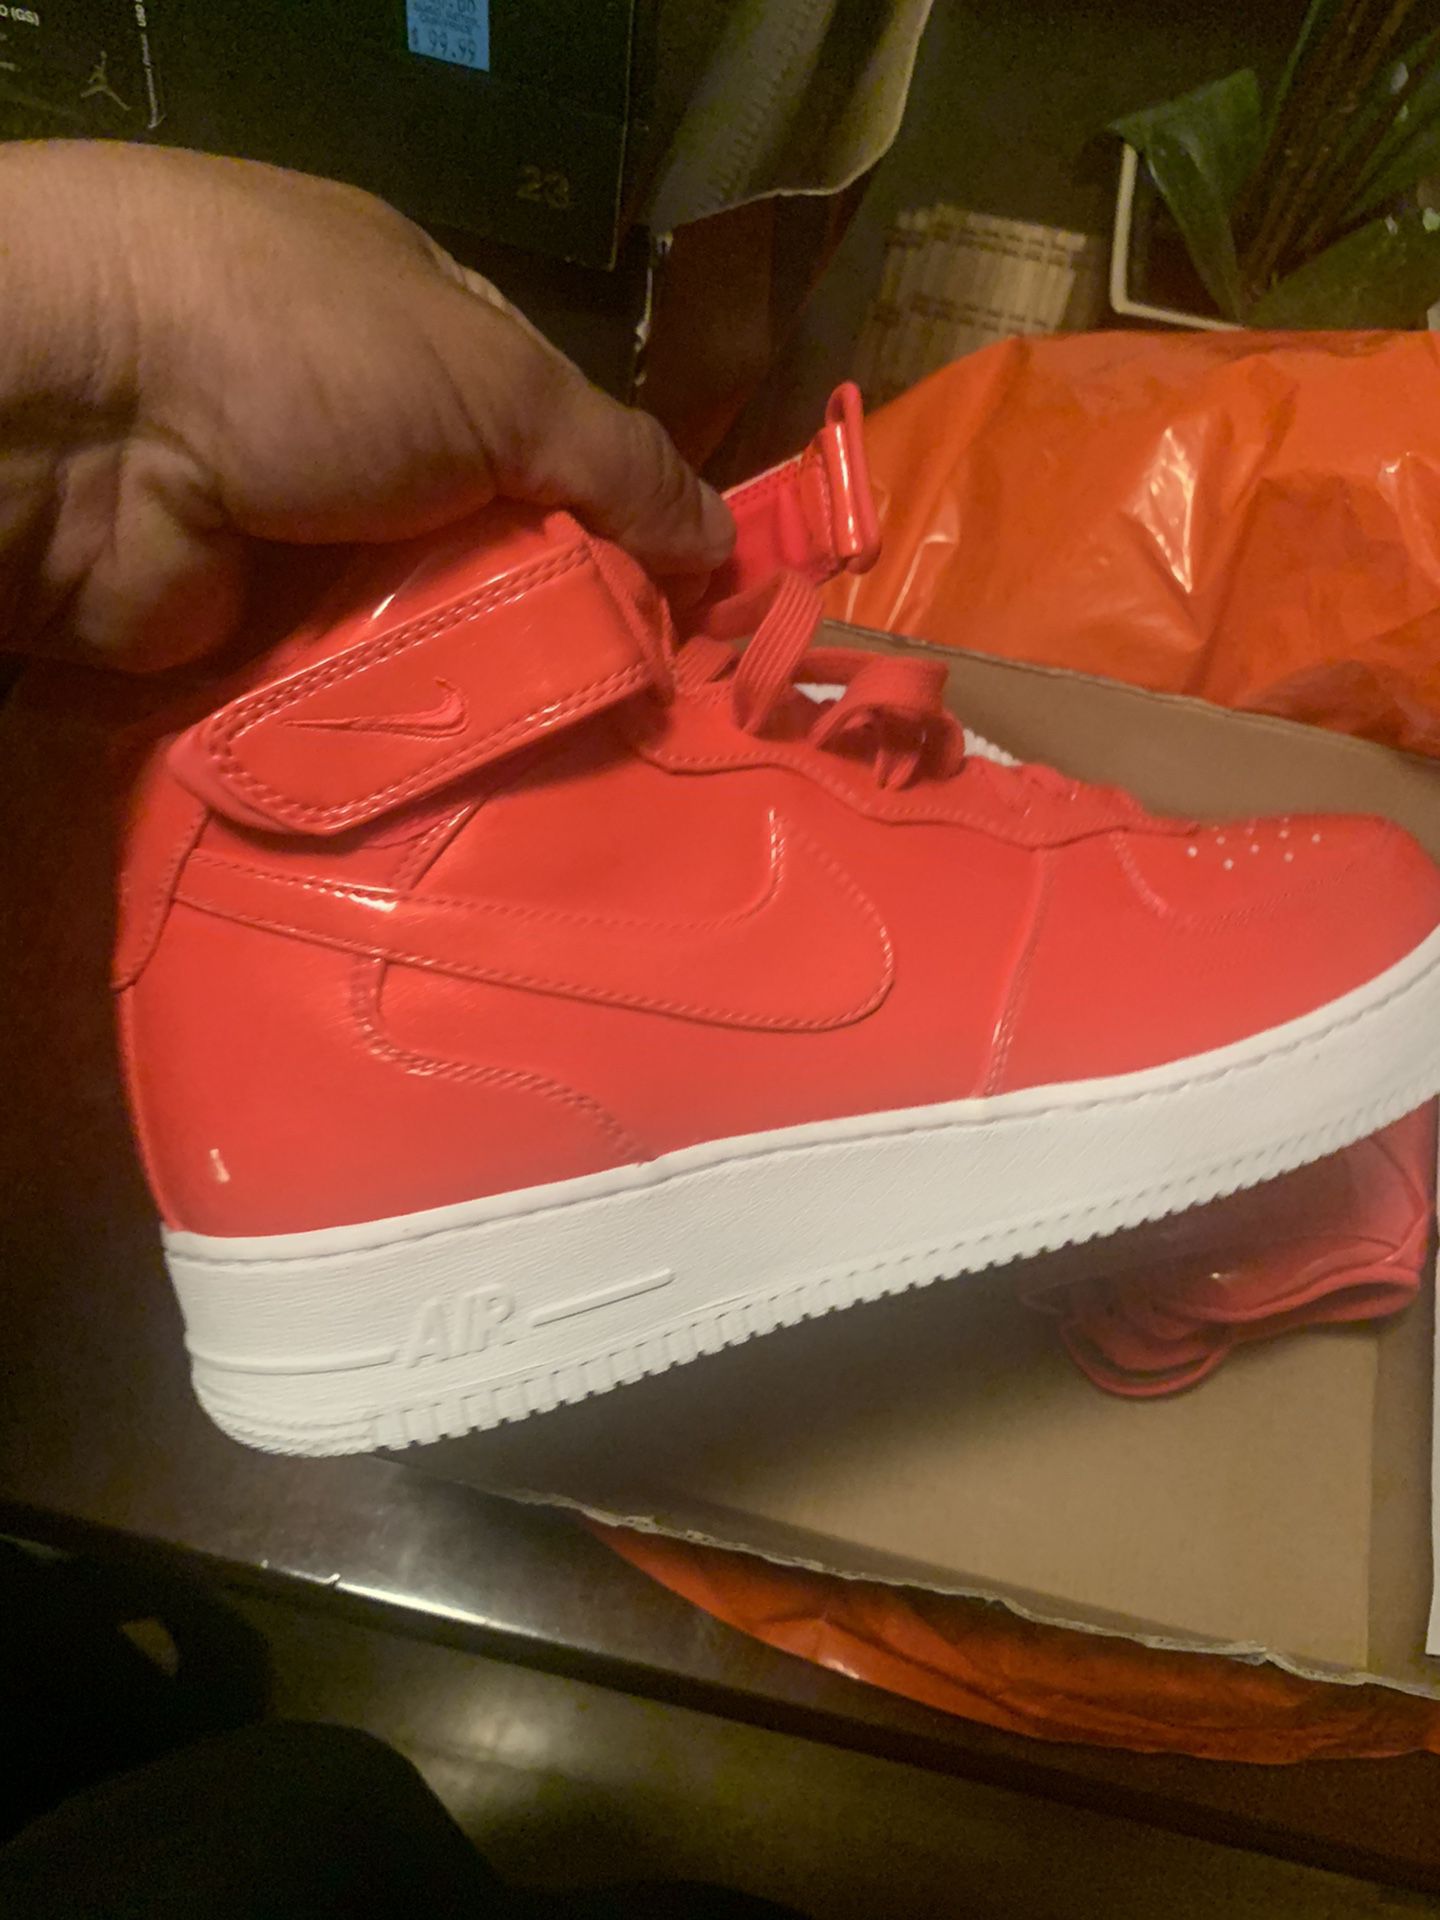 New patten leather af1 mids size 11 siren red and white $80 obo mids